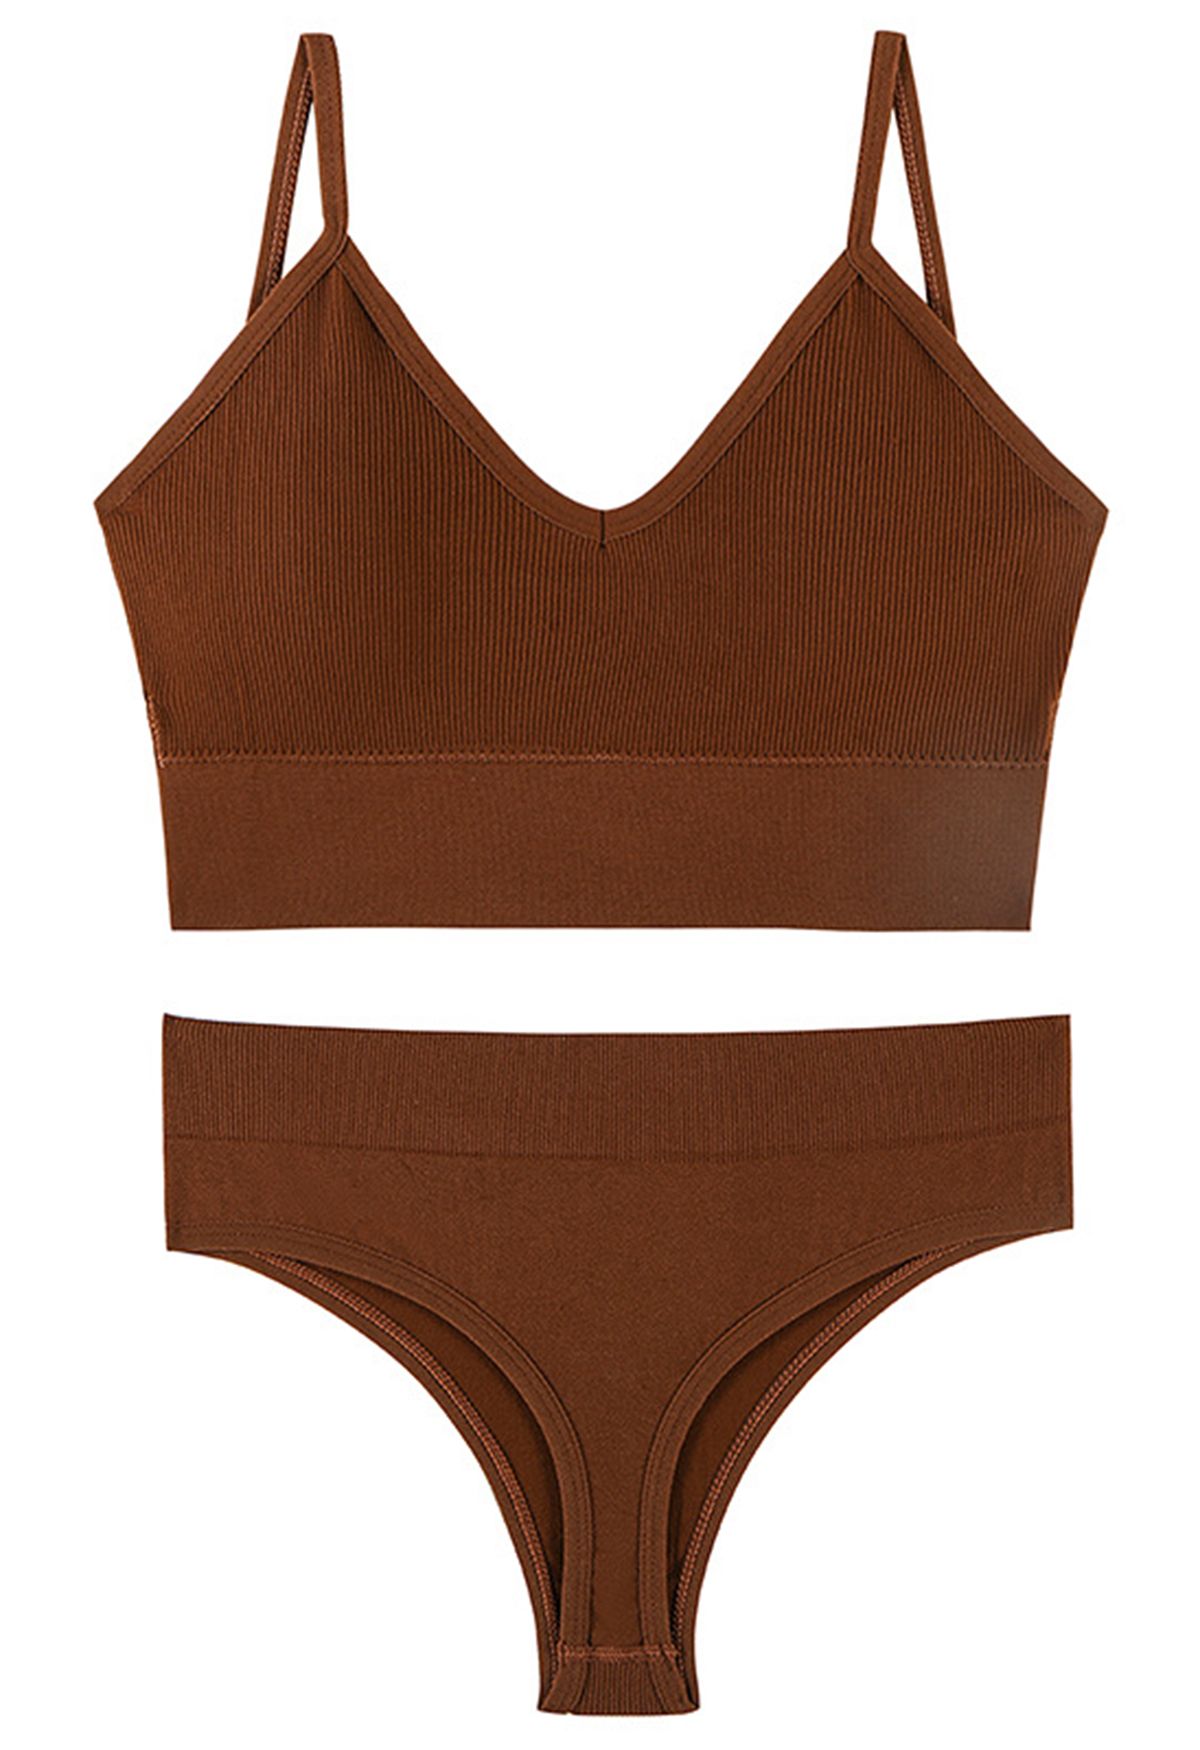 Plain Ribbed Lingerie Bra Top and Thong Set in Caramel